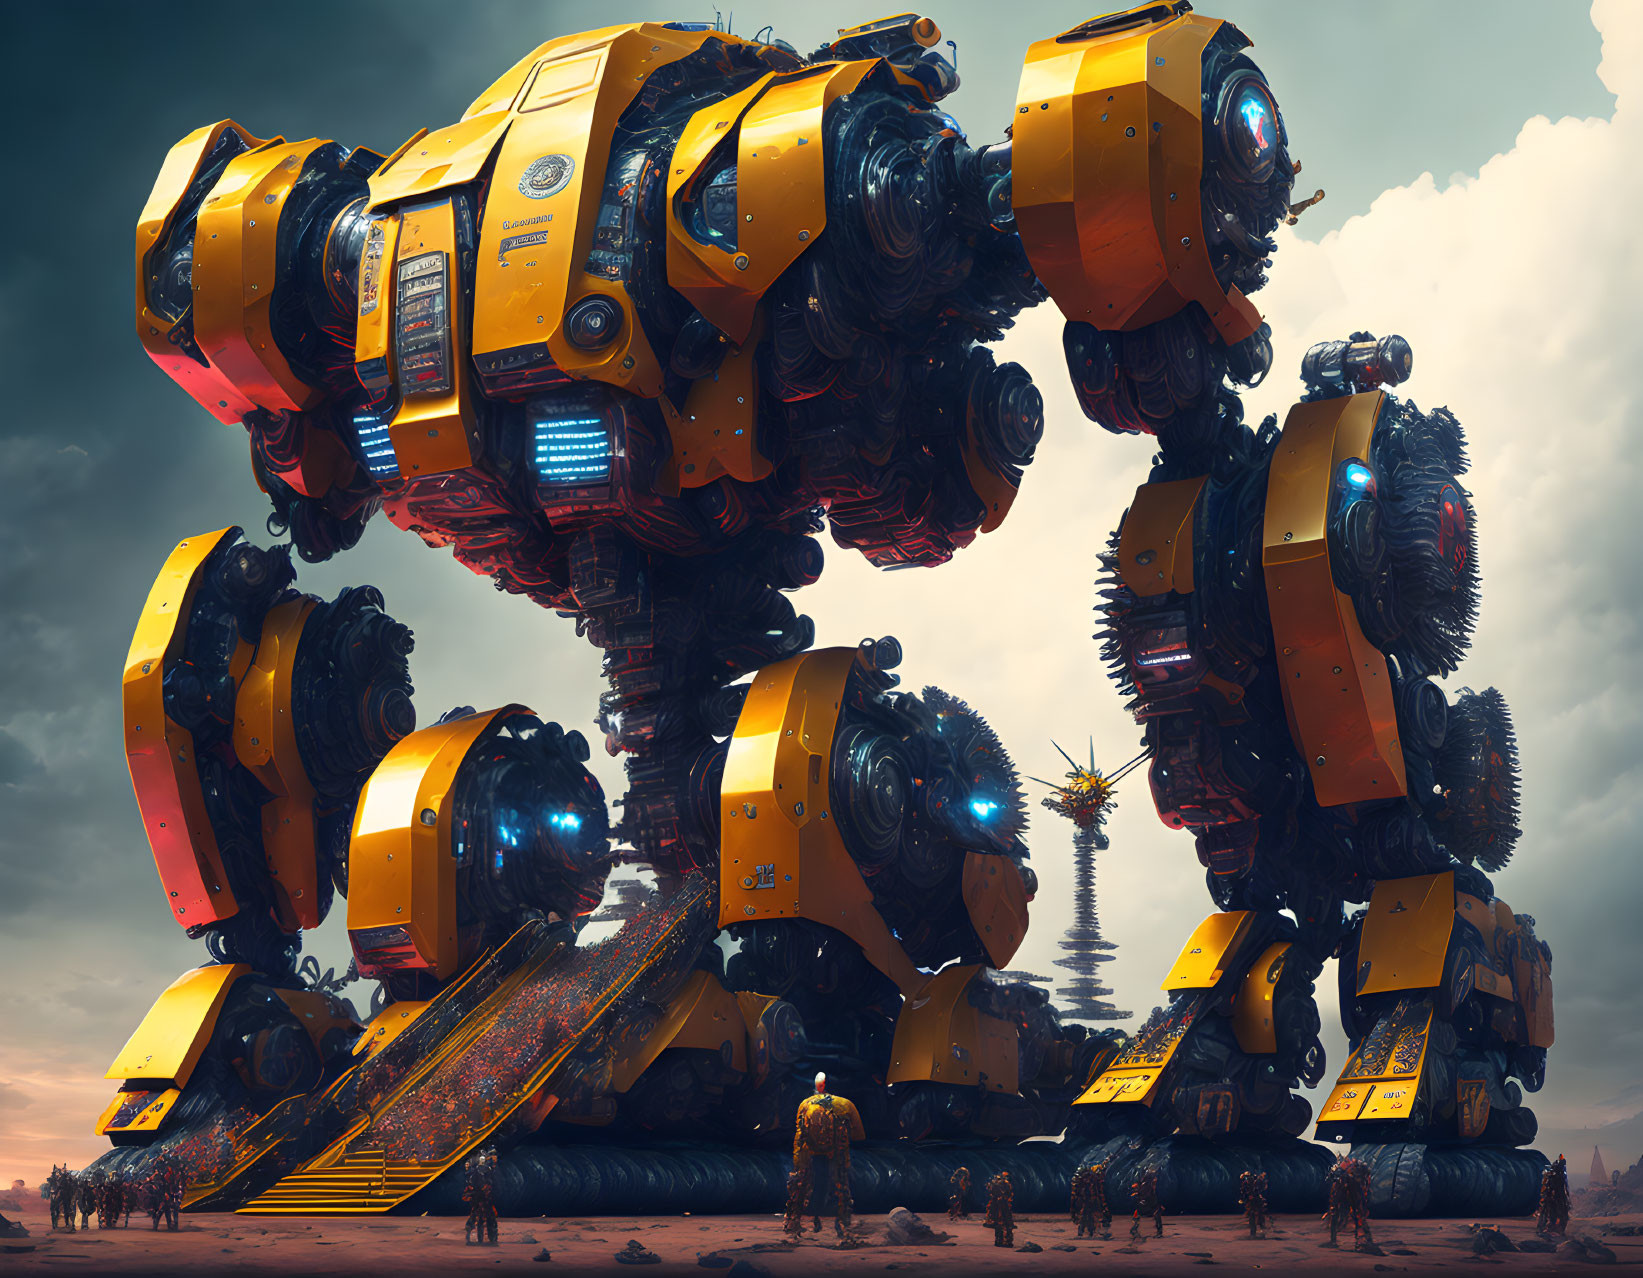 Yellow and Black Robotic Structures in Futuristic Landscape